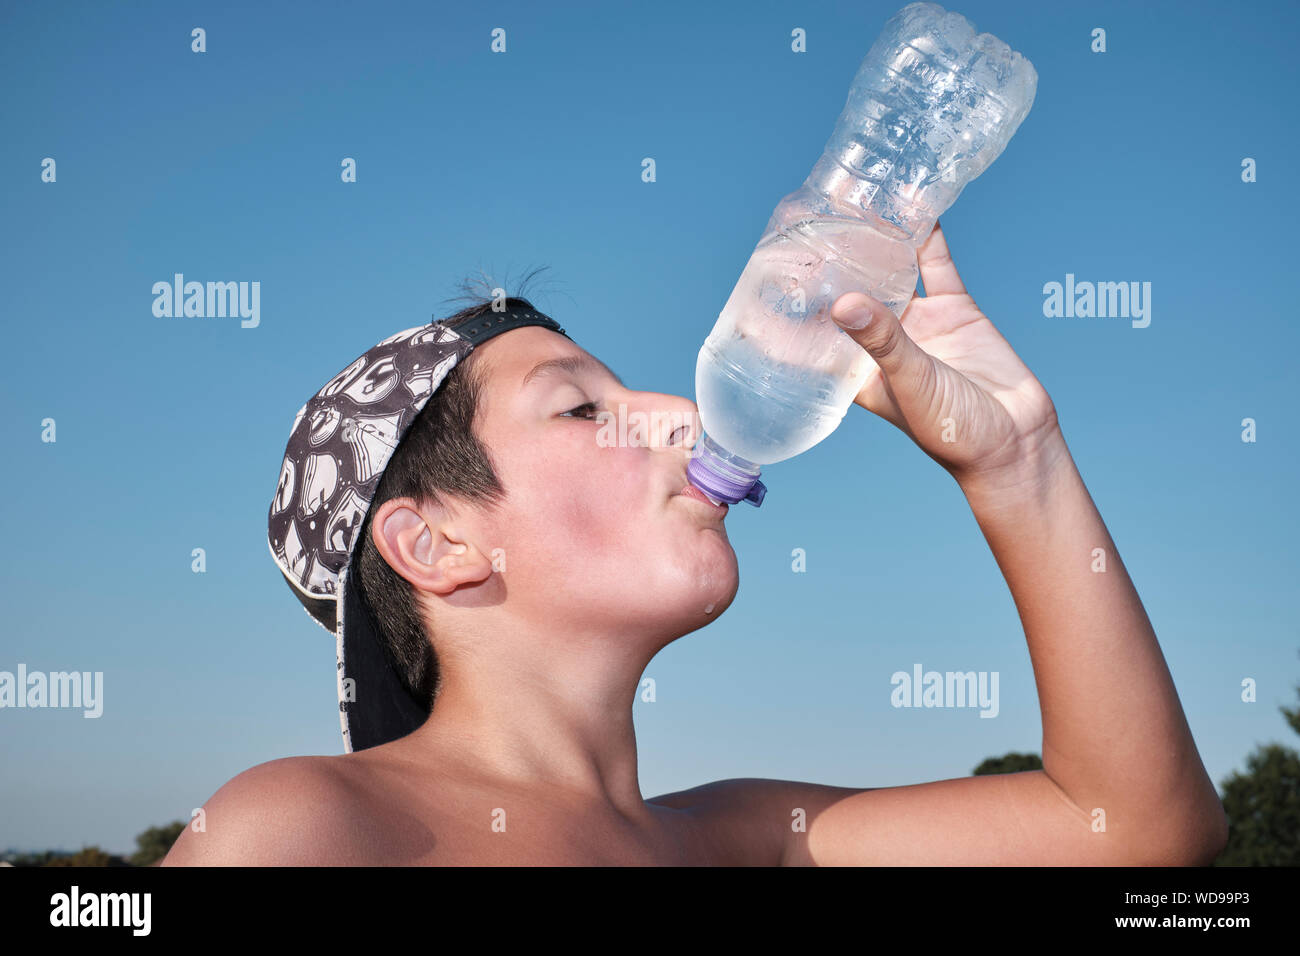 ice cold water bottle Stock Photo